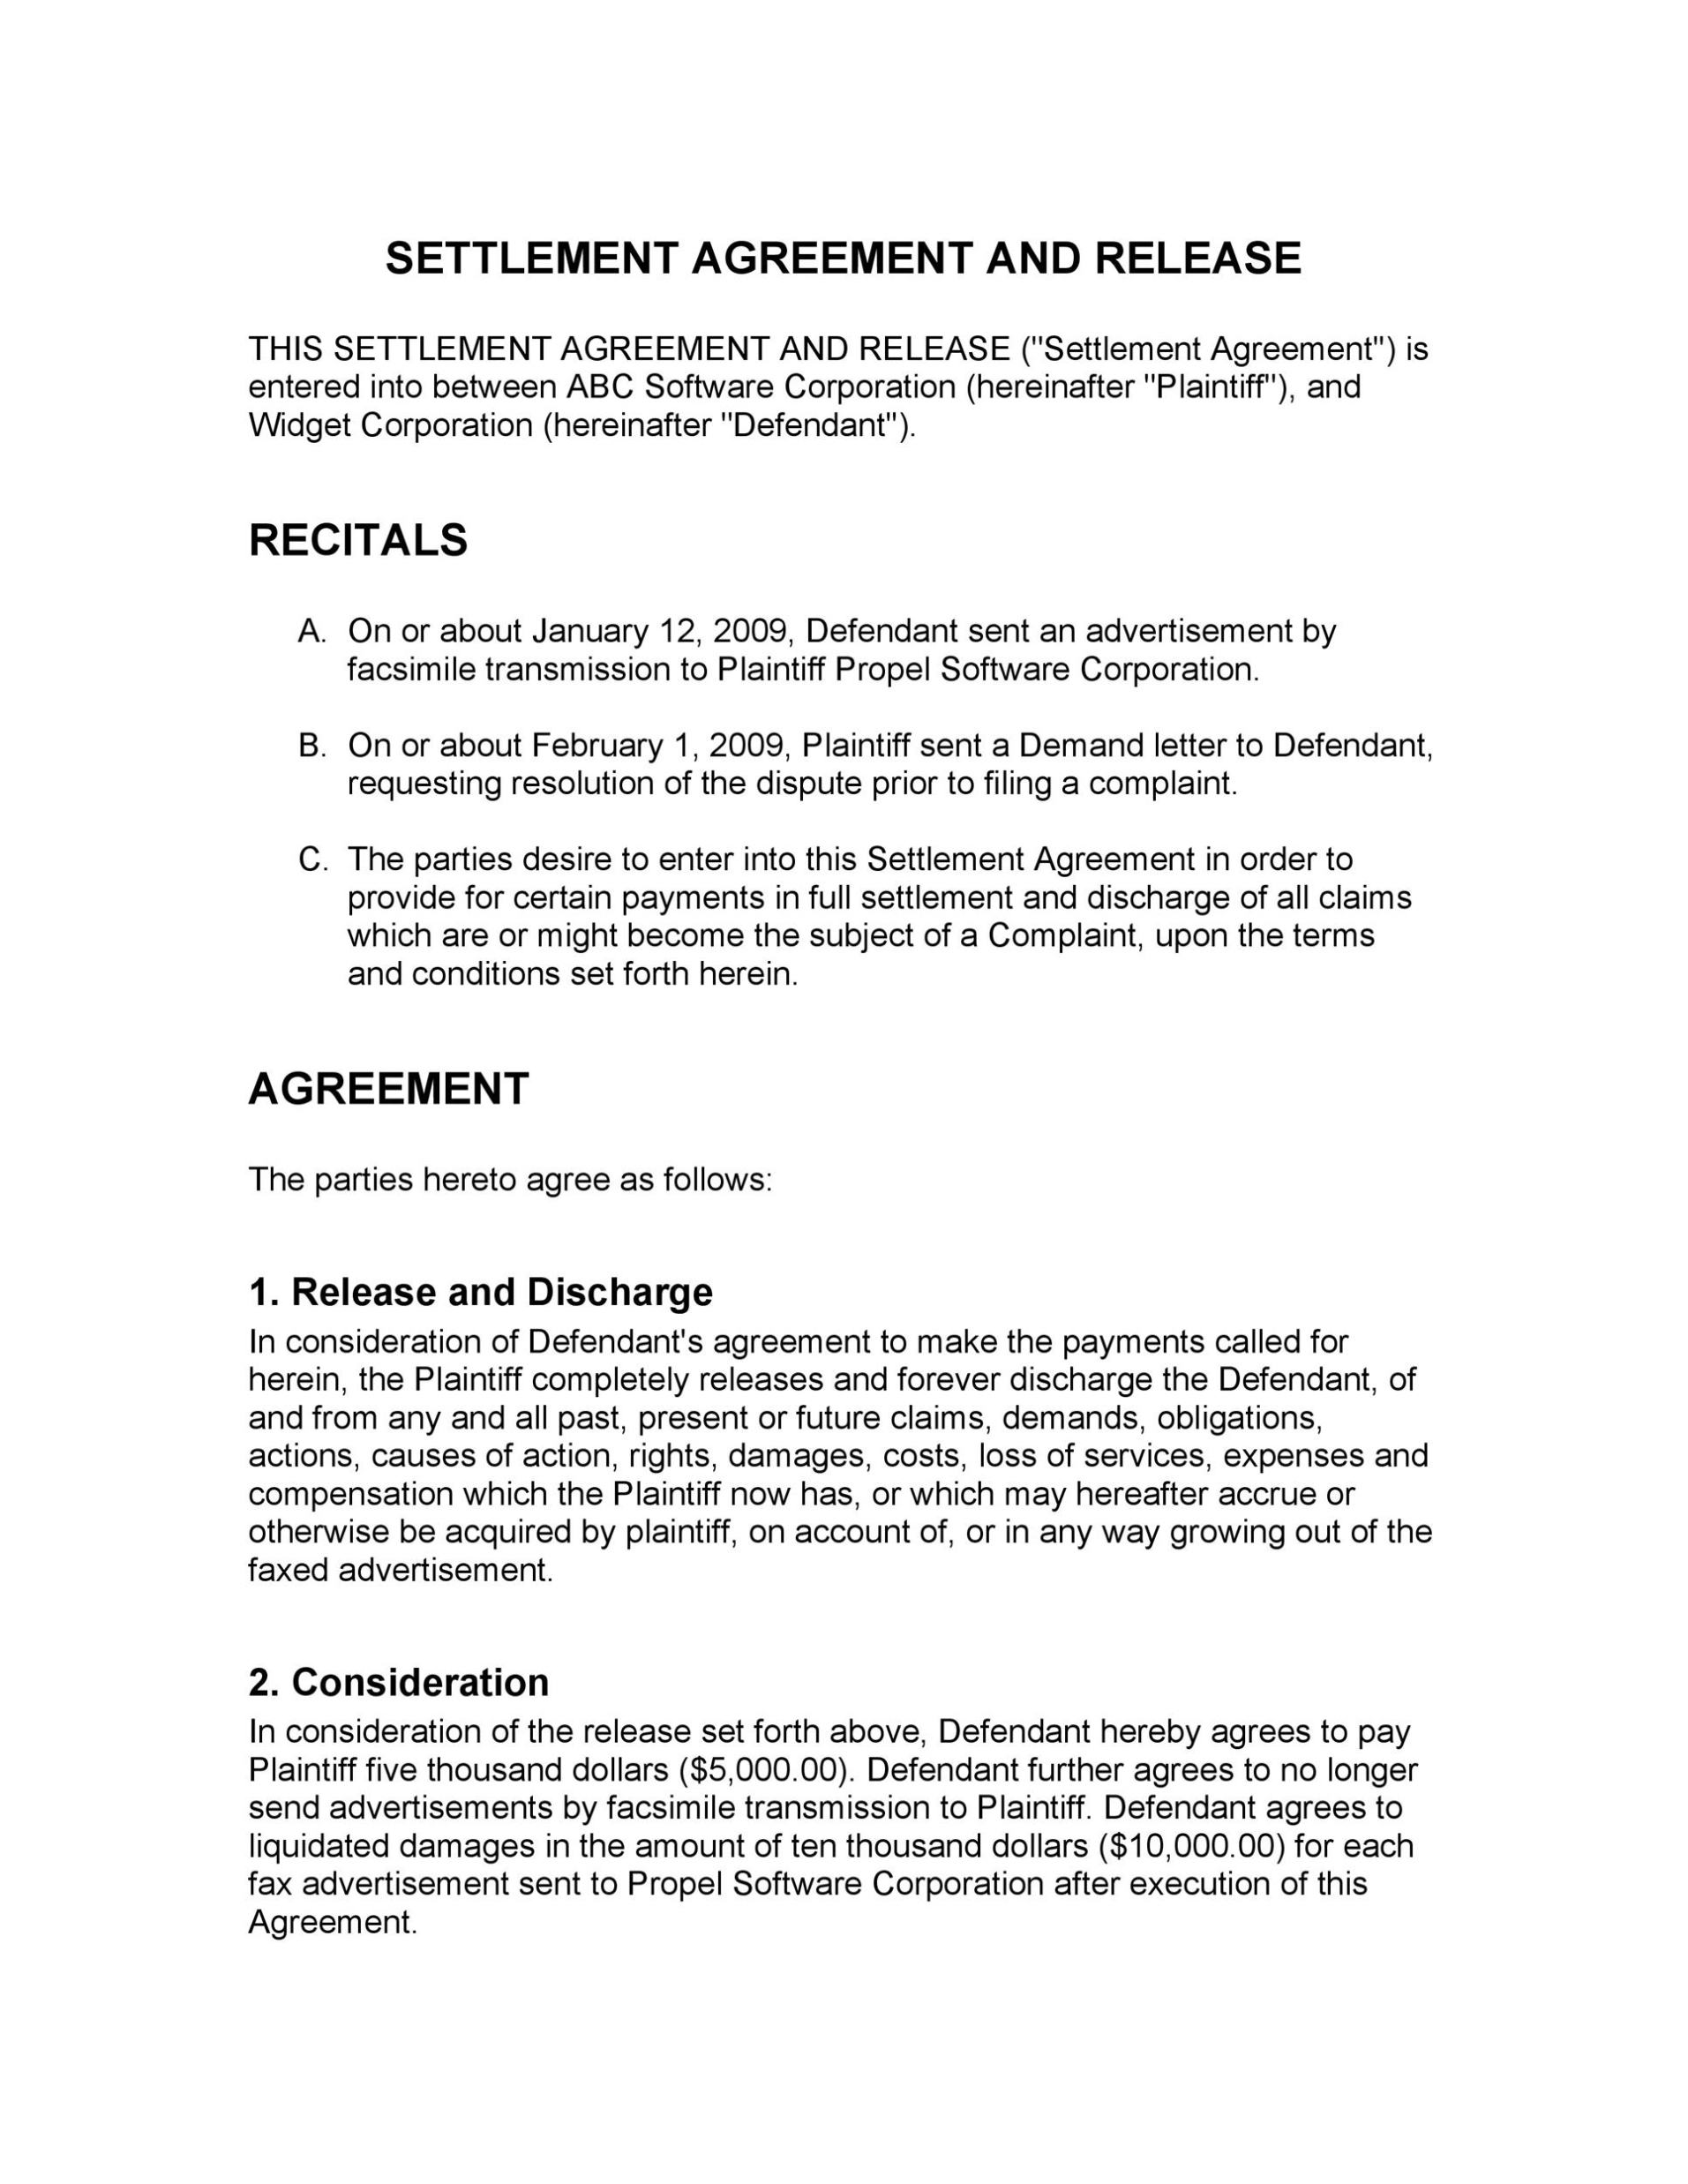 43 Free Settlement Agreement Templates [Divorce/Debt/Employment..] With Settlement Agreement And Release Of All Claims Template